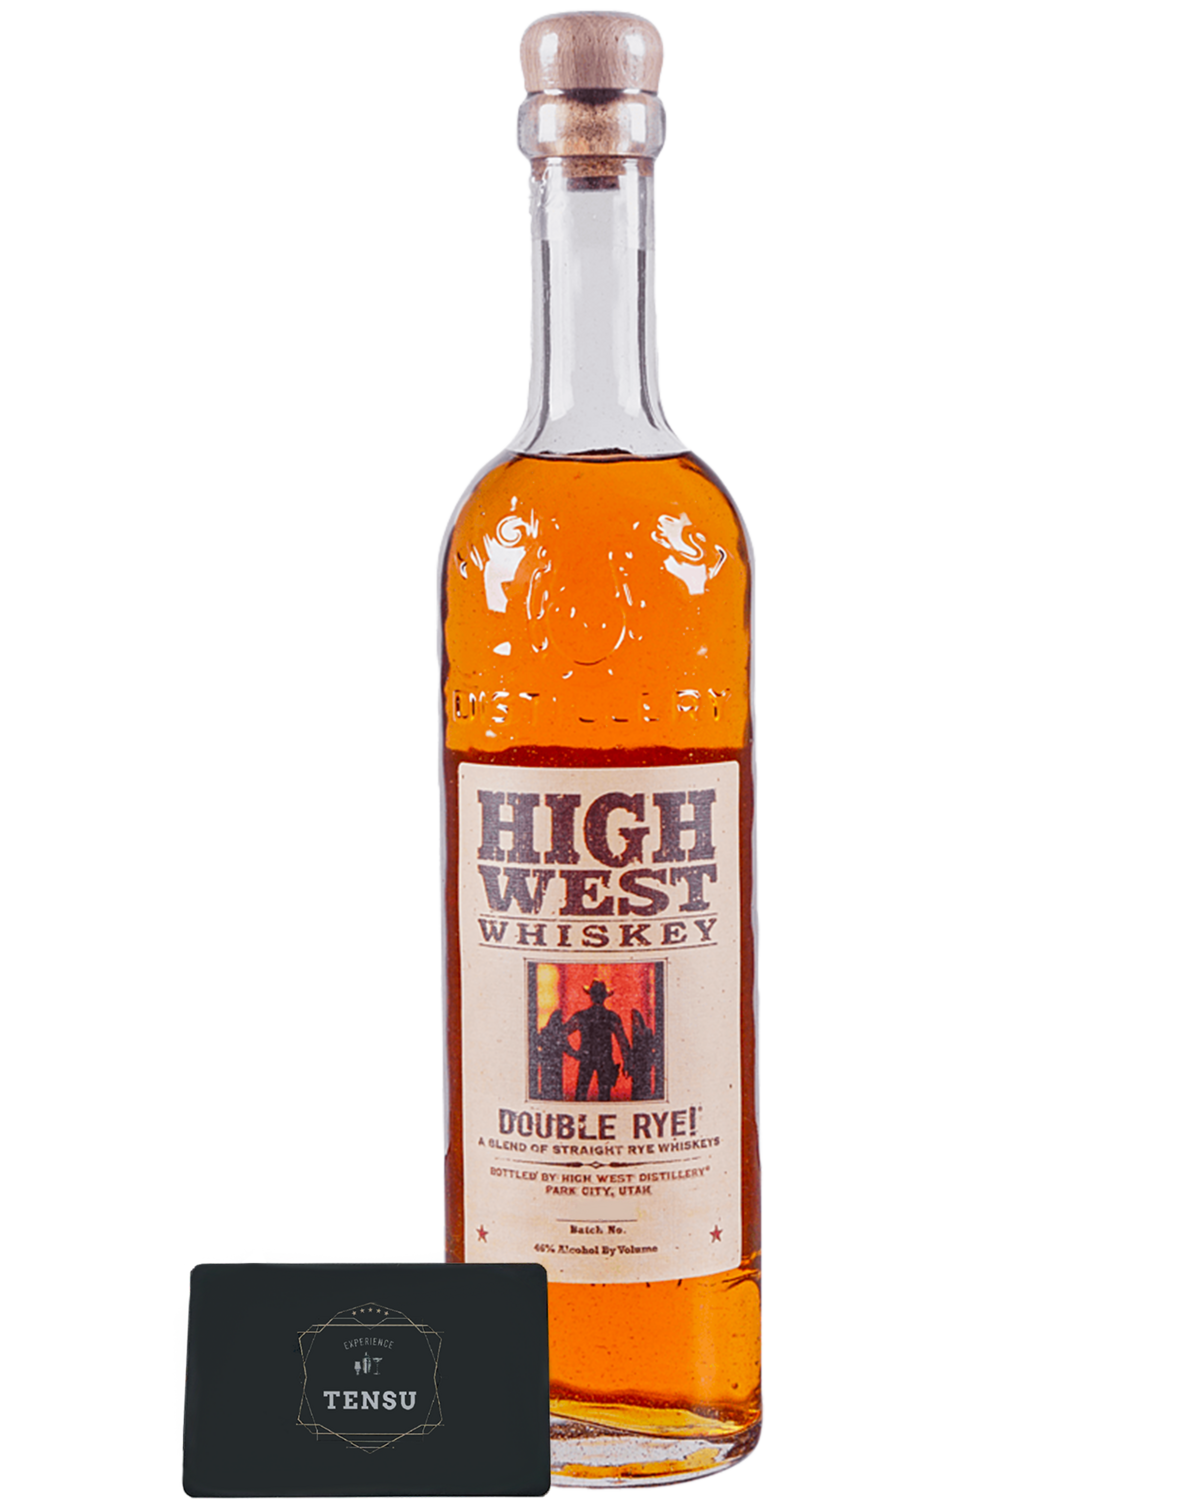 High West Double Rye Whiskey 46.0 "OB"